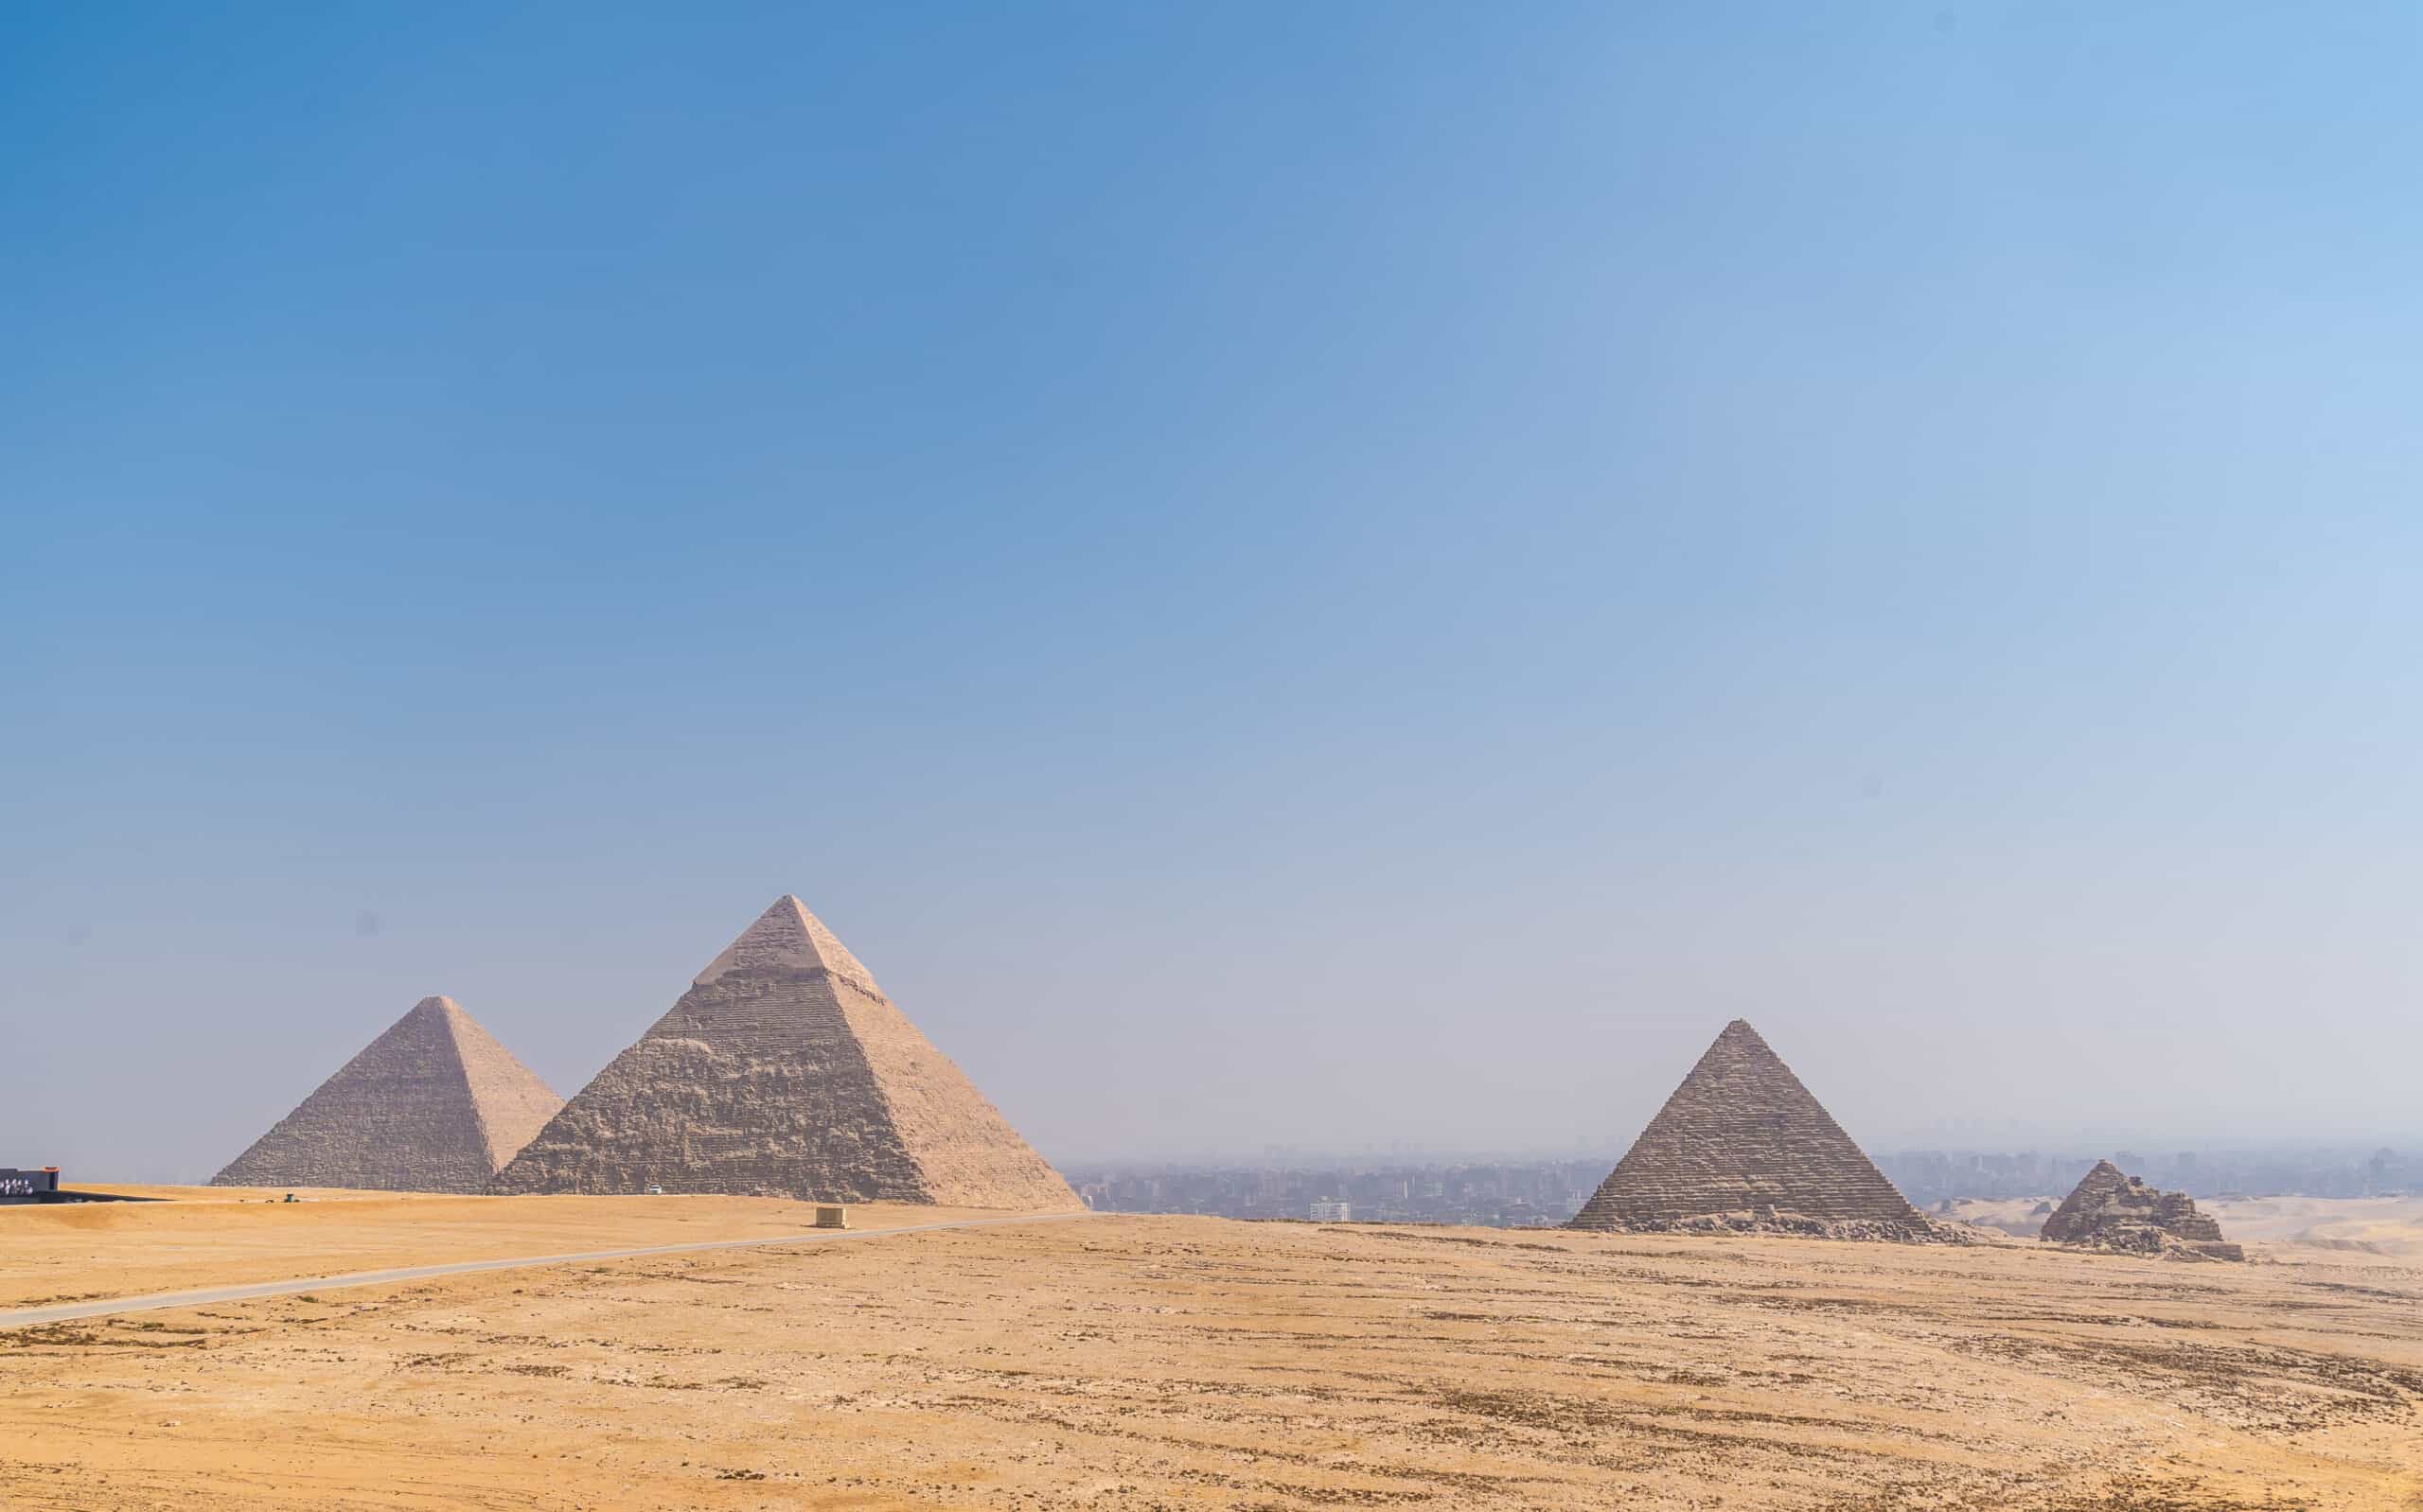 Pyramids Of Giza, The Oldest Funerary Monument In The World, Cairo, Egypt